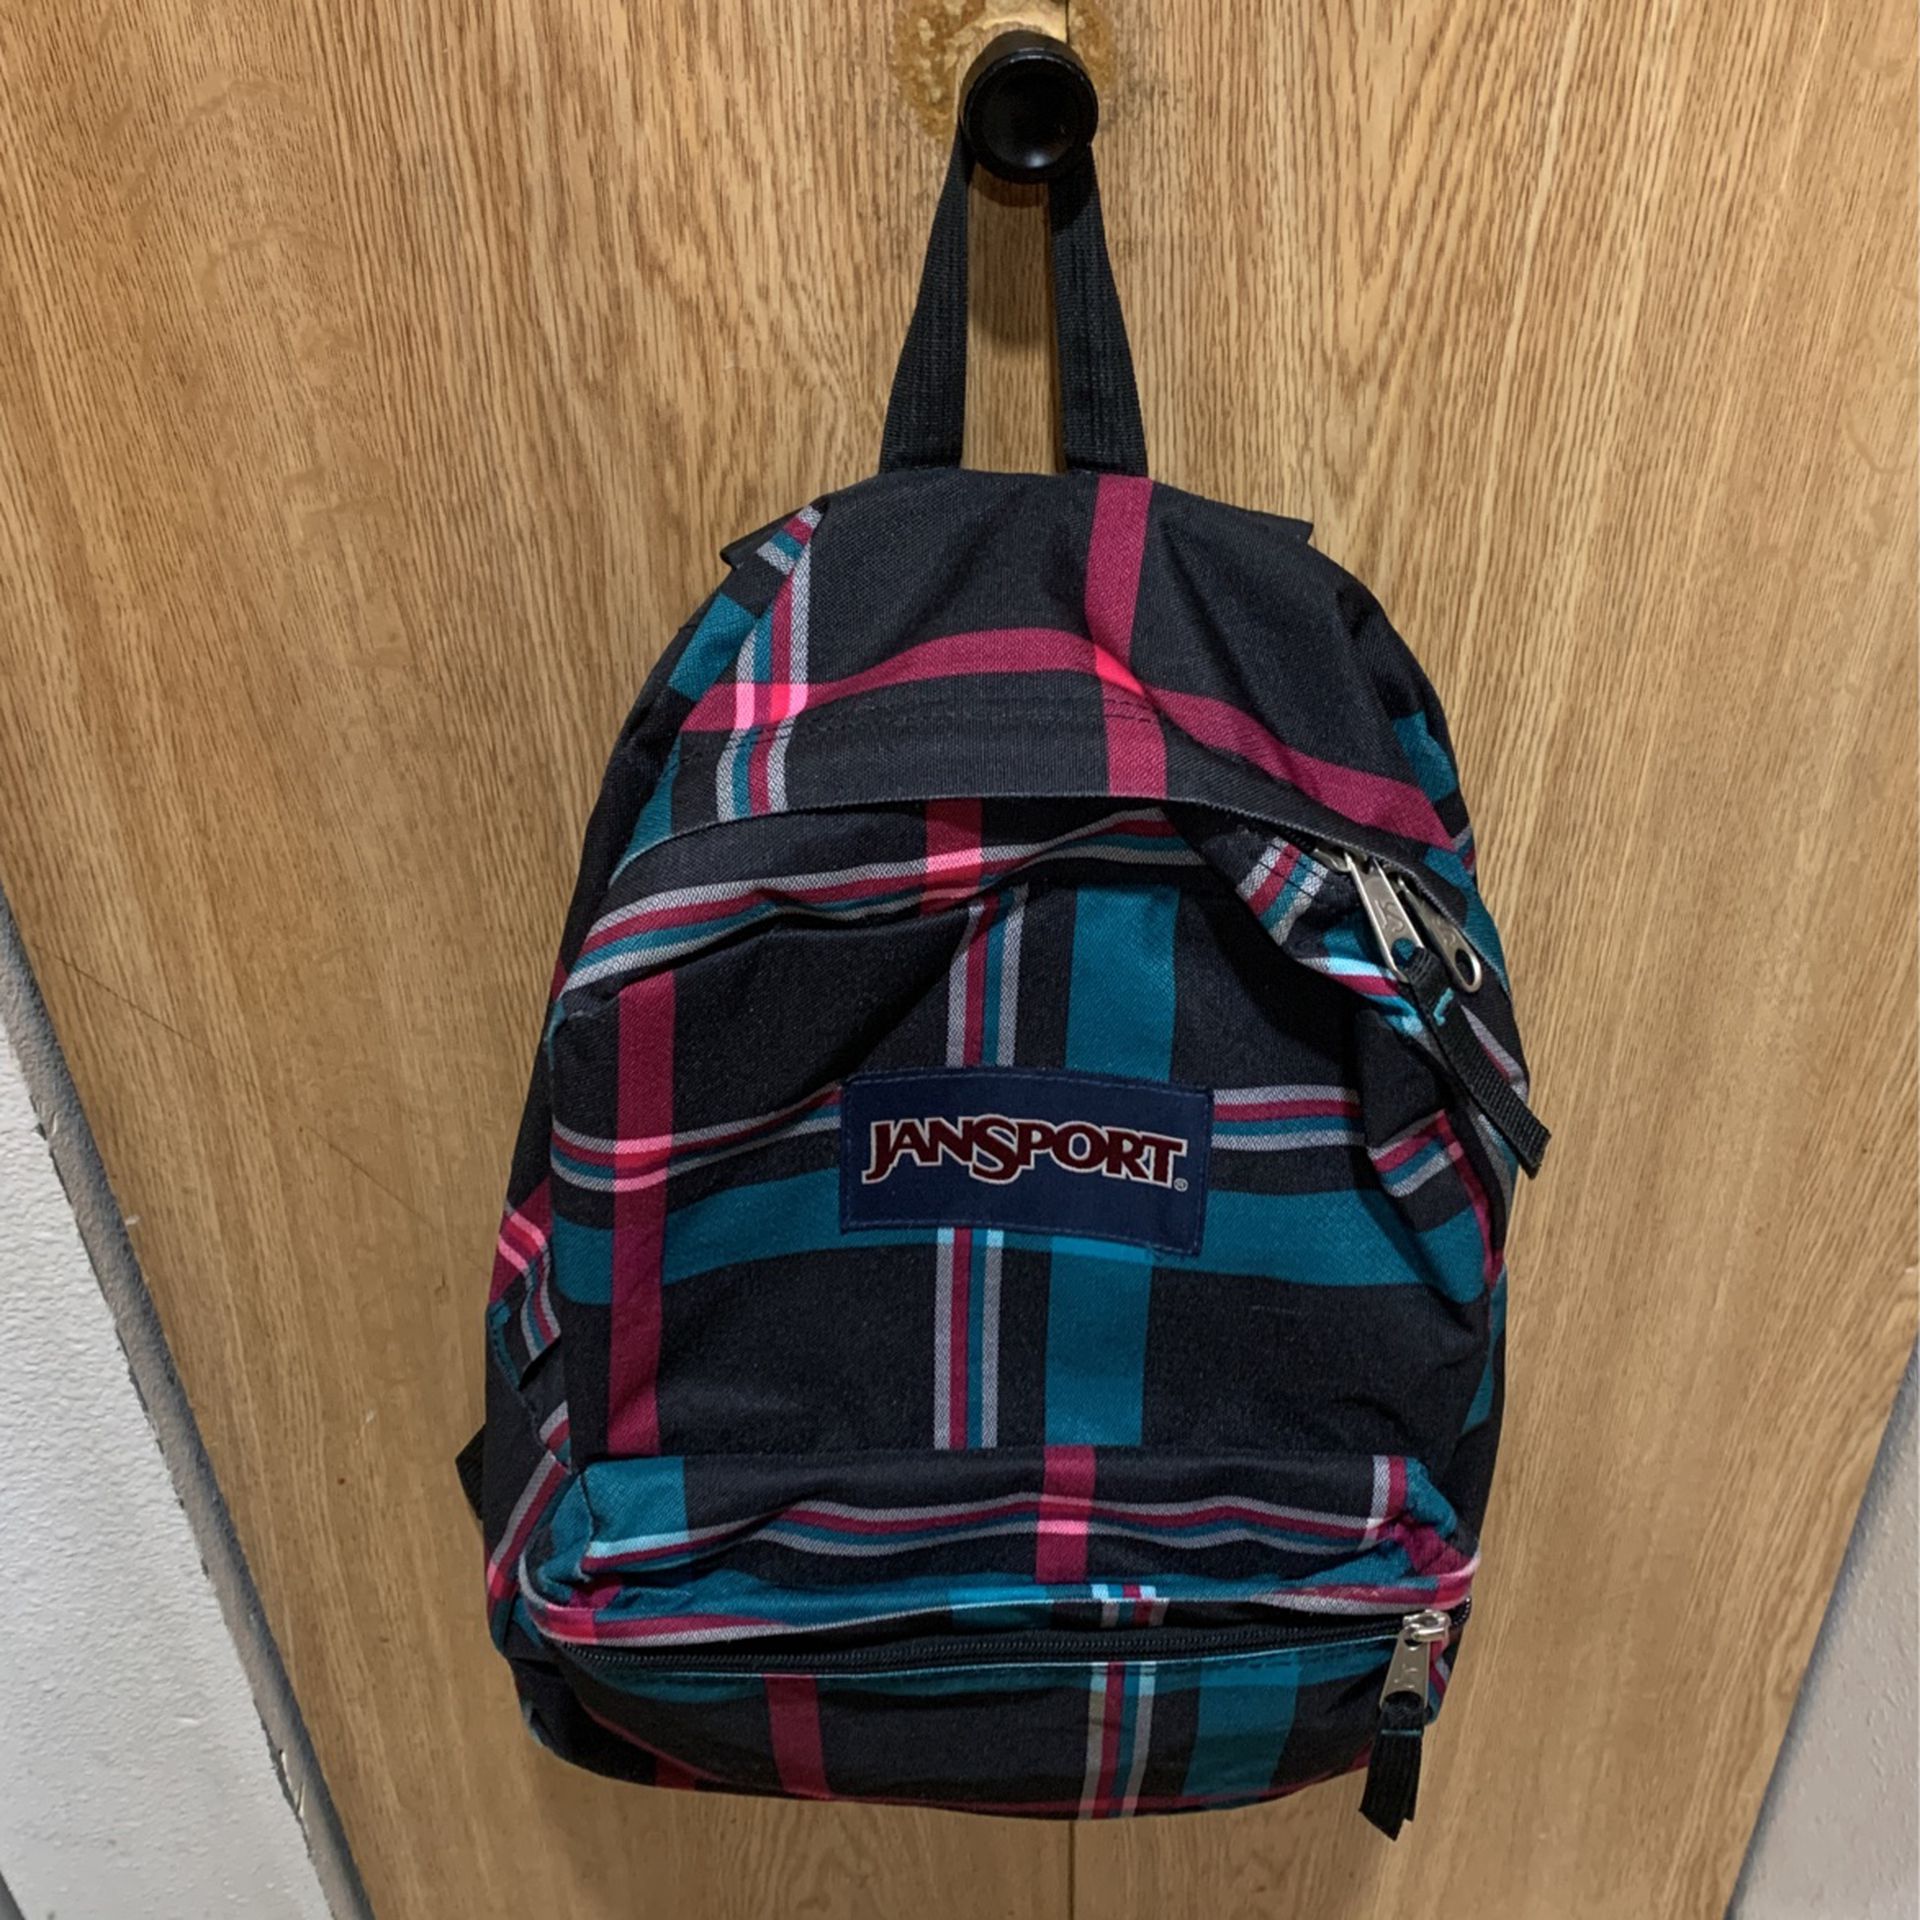 JanSport Plaid Checkered Backpack- Pink, Turquoise, White